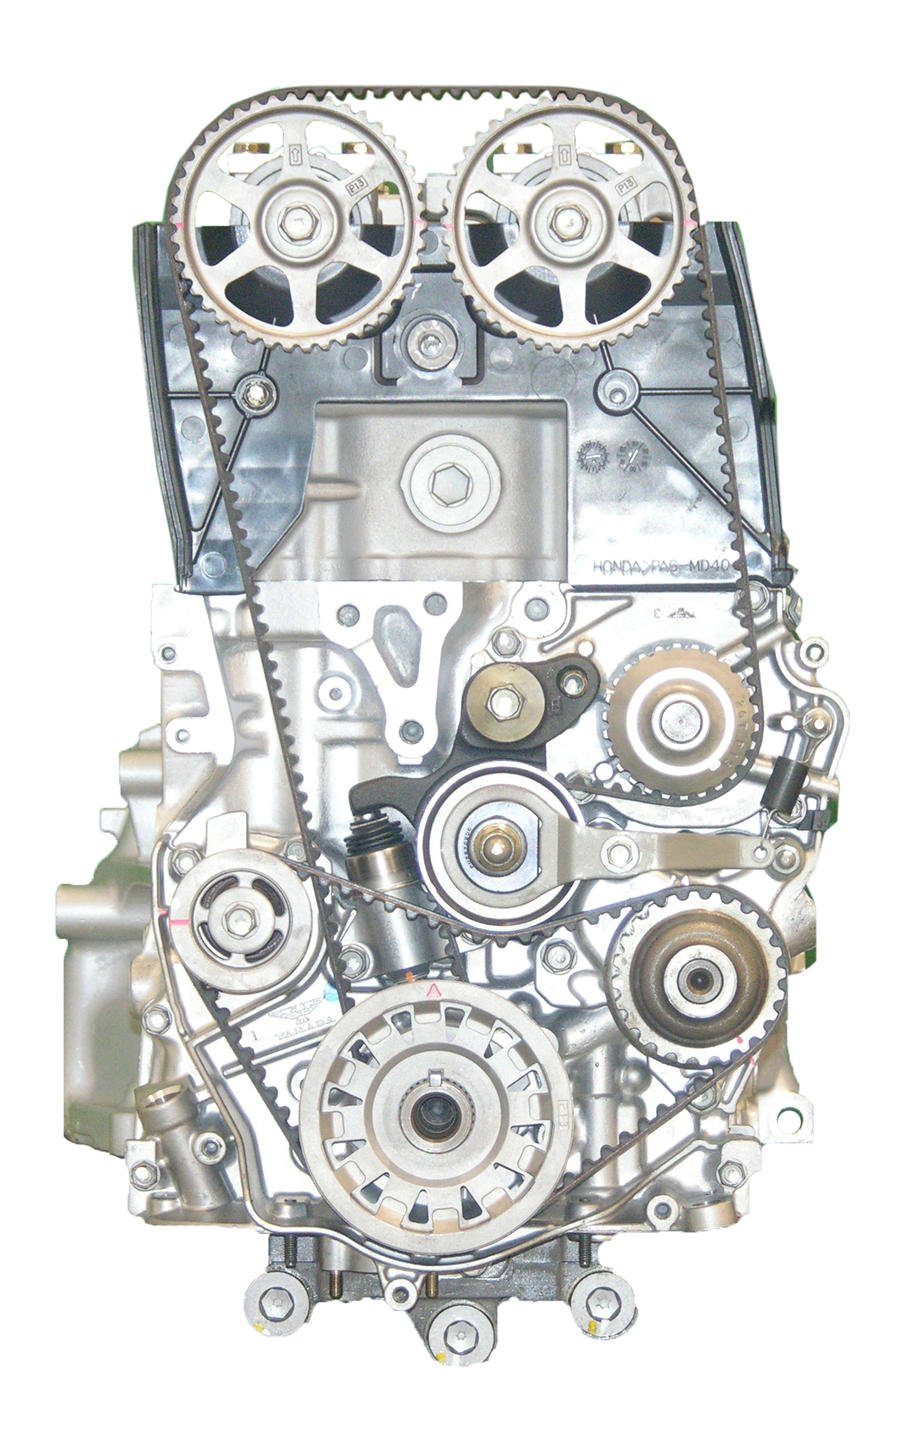 534B Remanufactured Crate Engine for 1997 Honda Prelude with 2.2L L4 H22A4